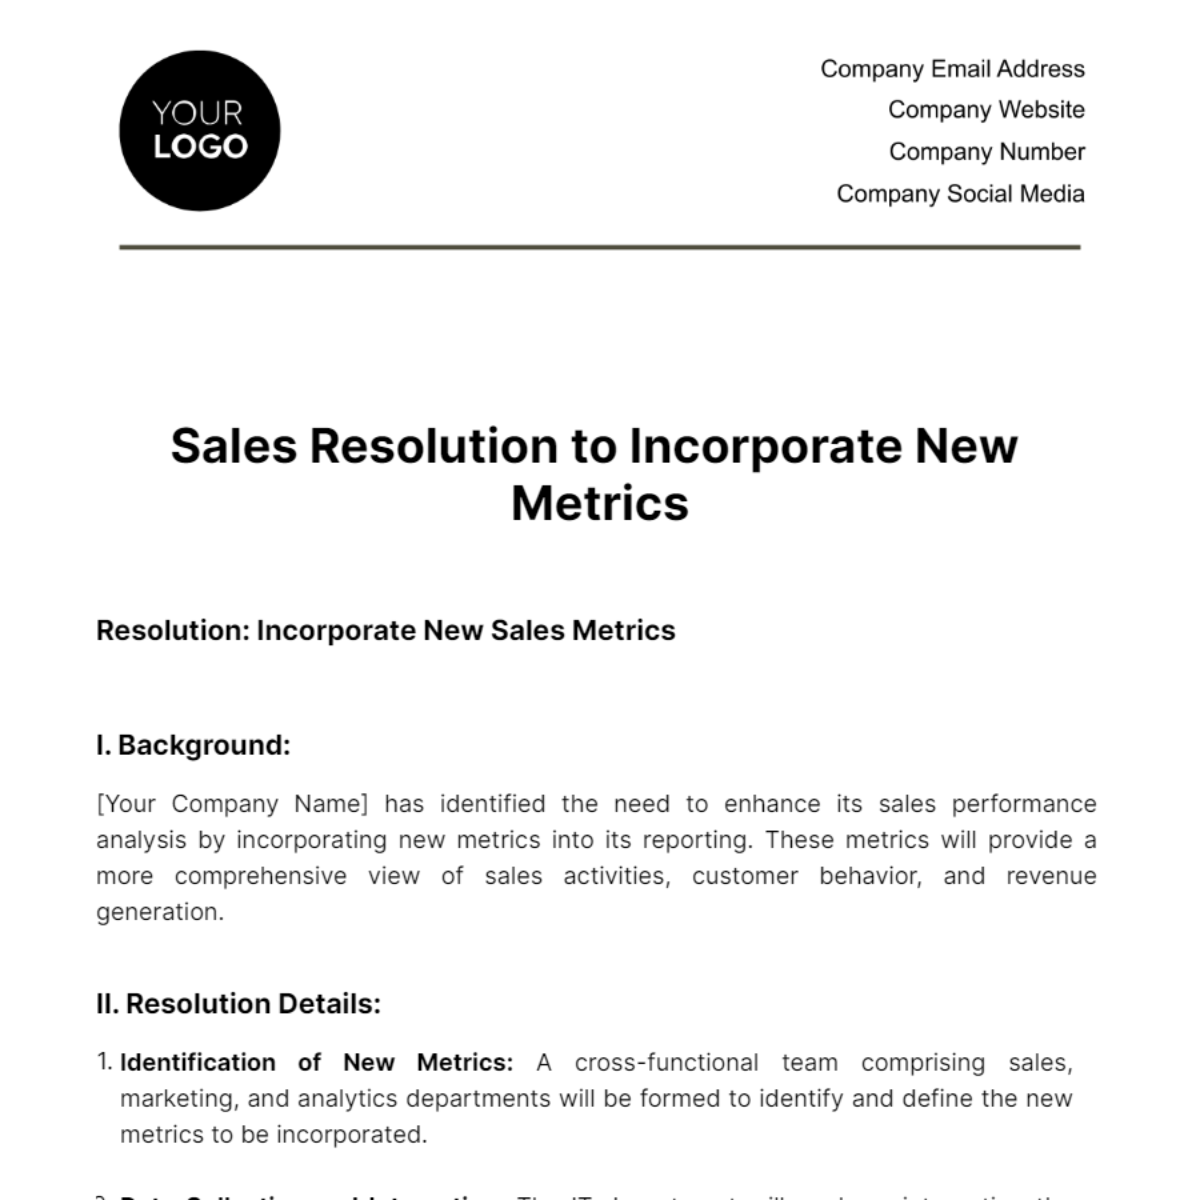 Free Sales Resolution to Incorporate New Metrics Template